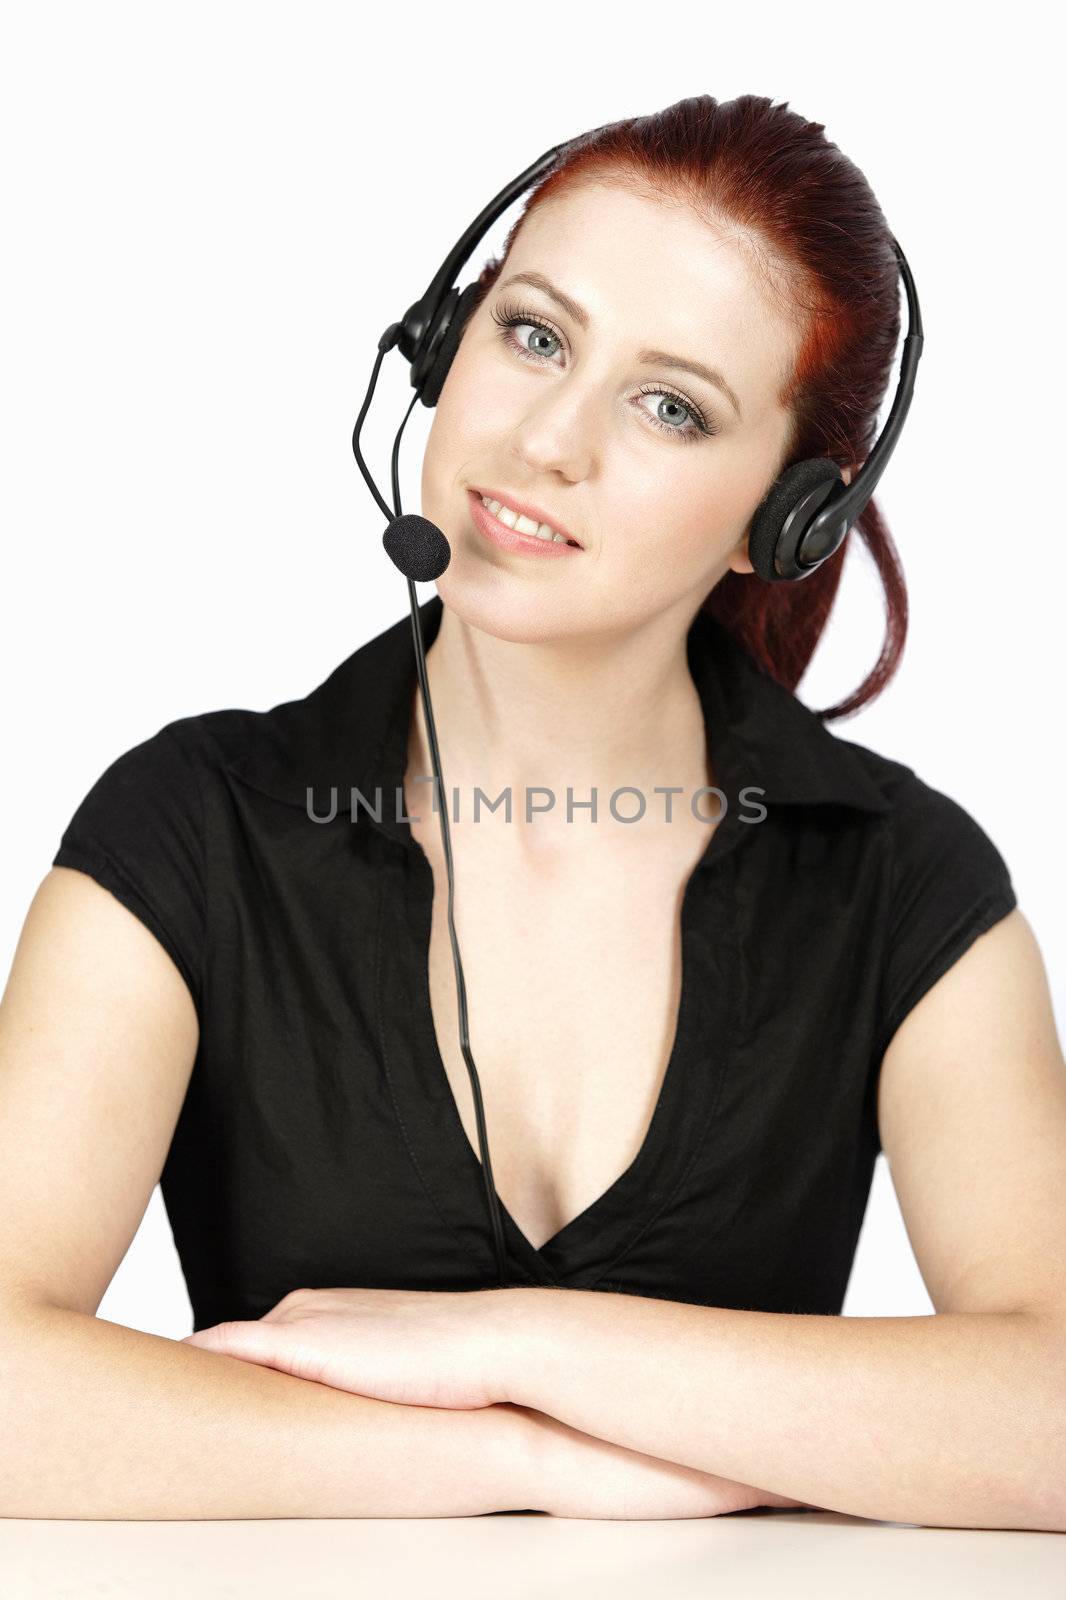 Professional woman talking on a headset in her office at work. With white background